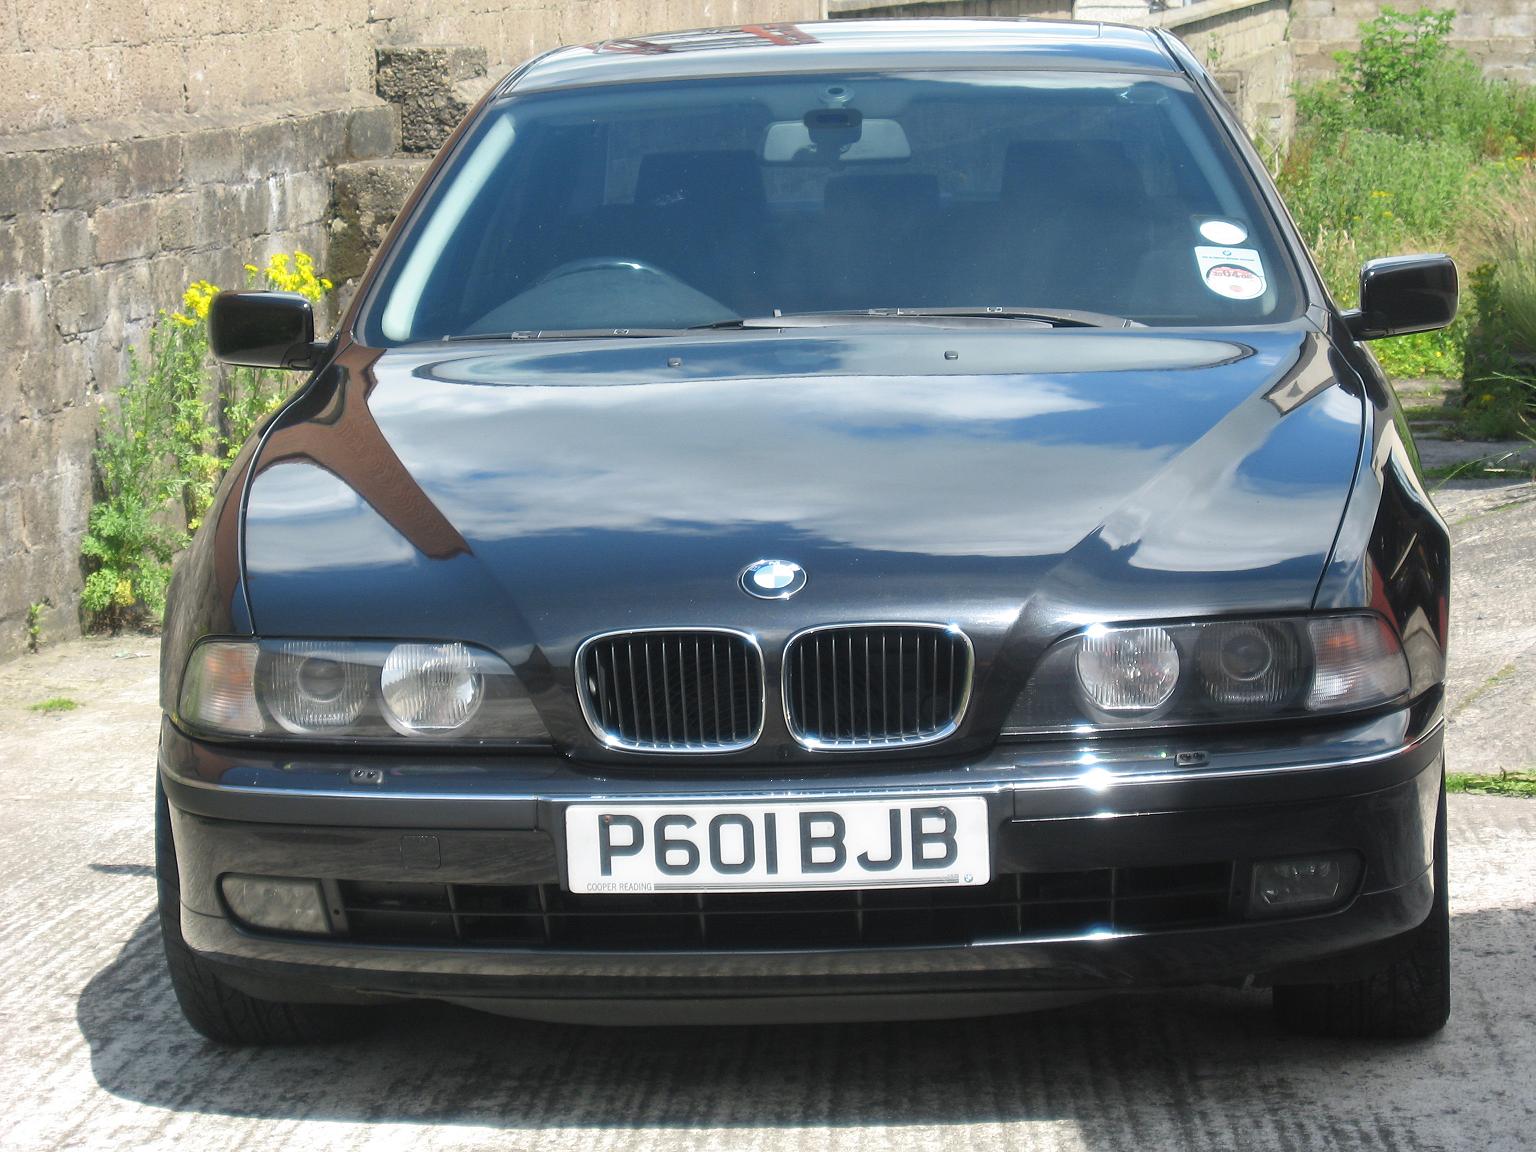 1997 Bmw 5 series 528i review #5